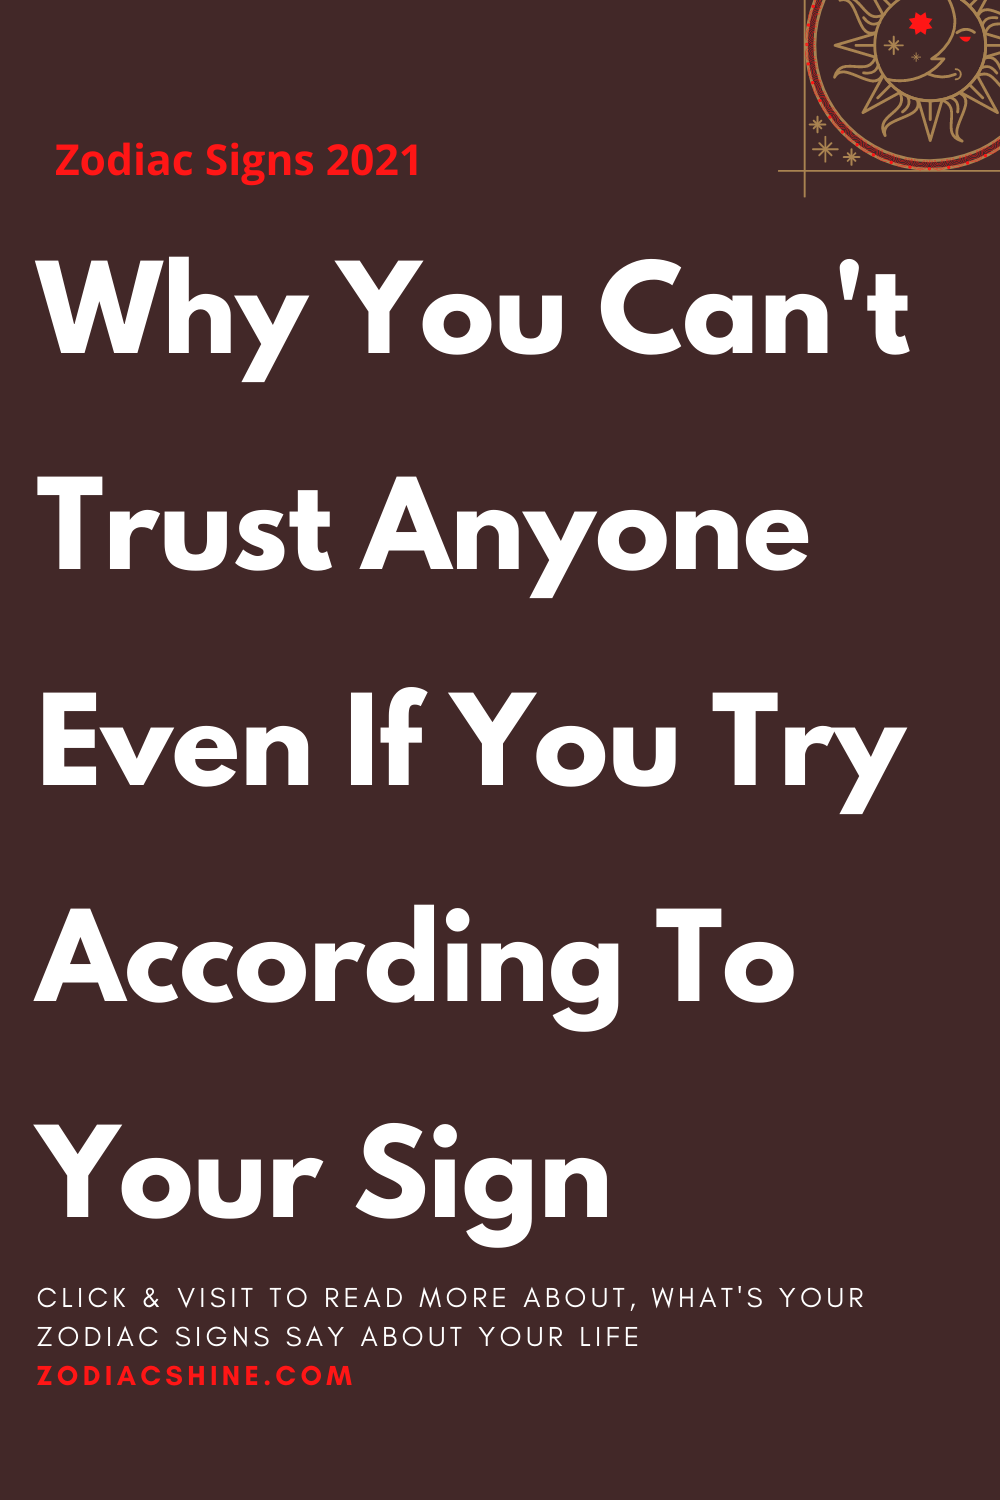 Why You Can't Trust Anyone Even If You Try According To Your Sign